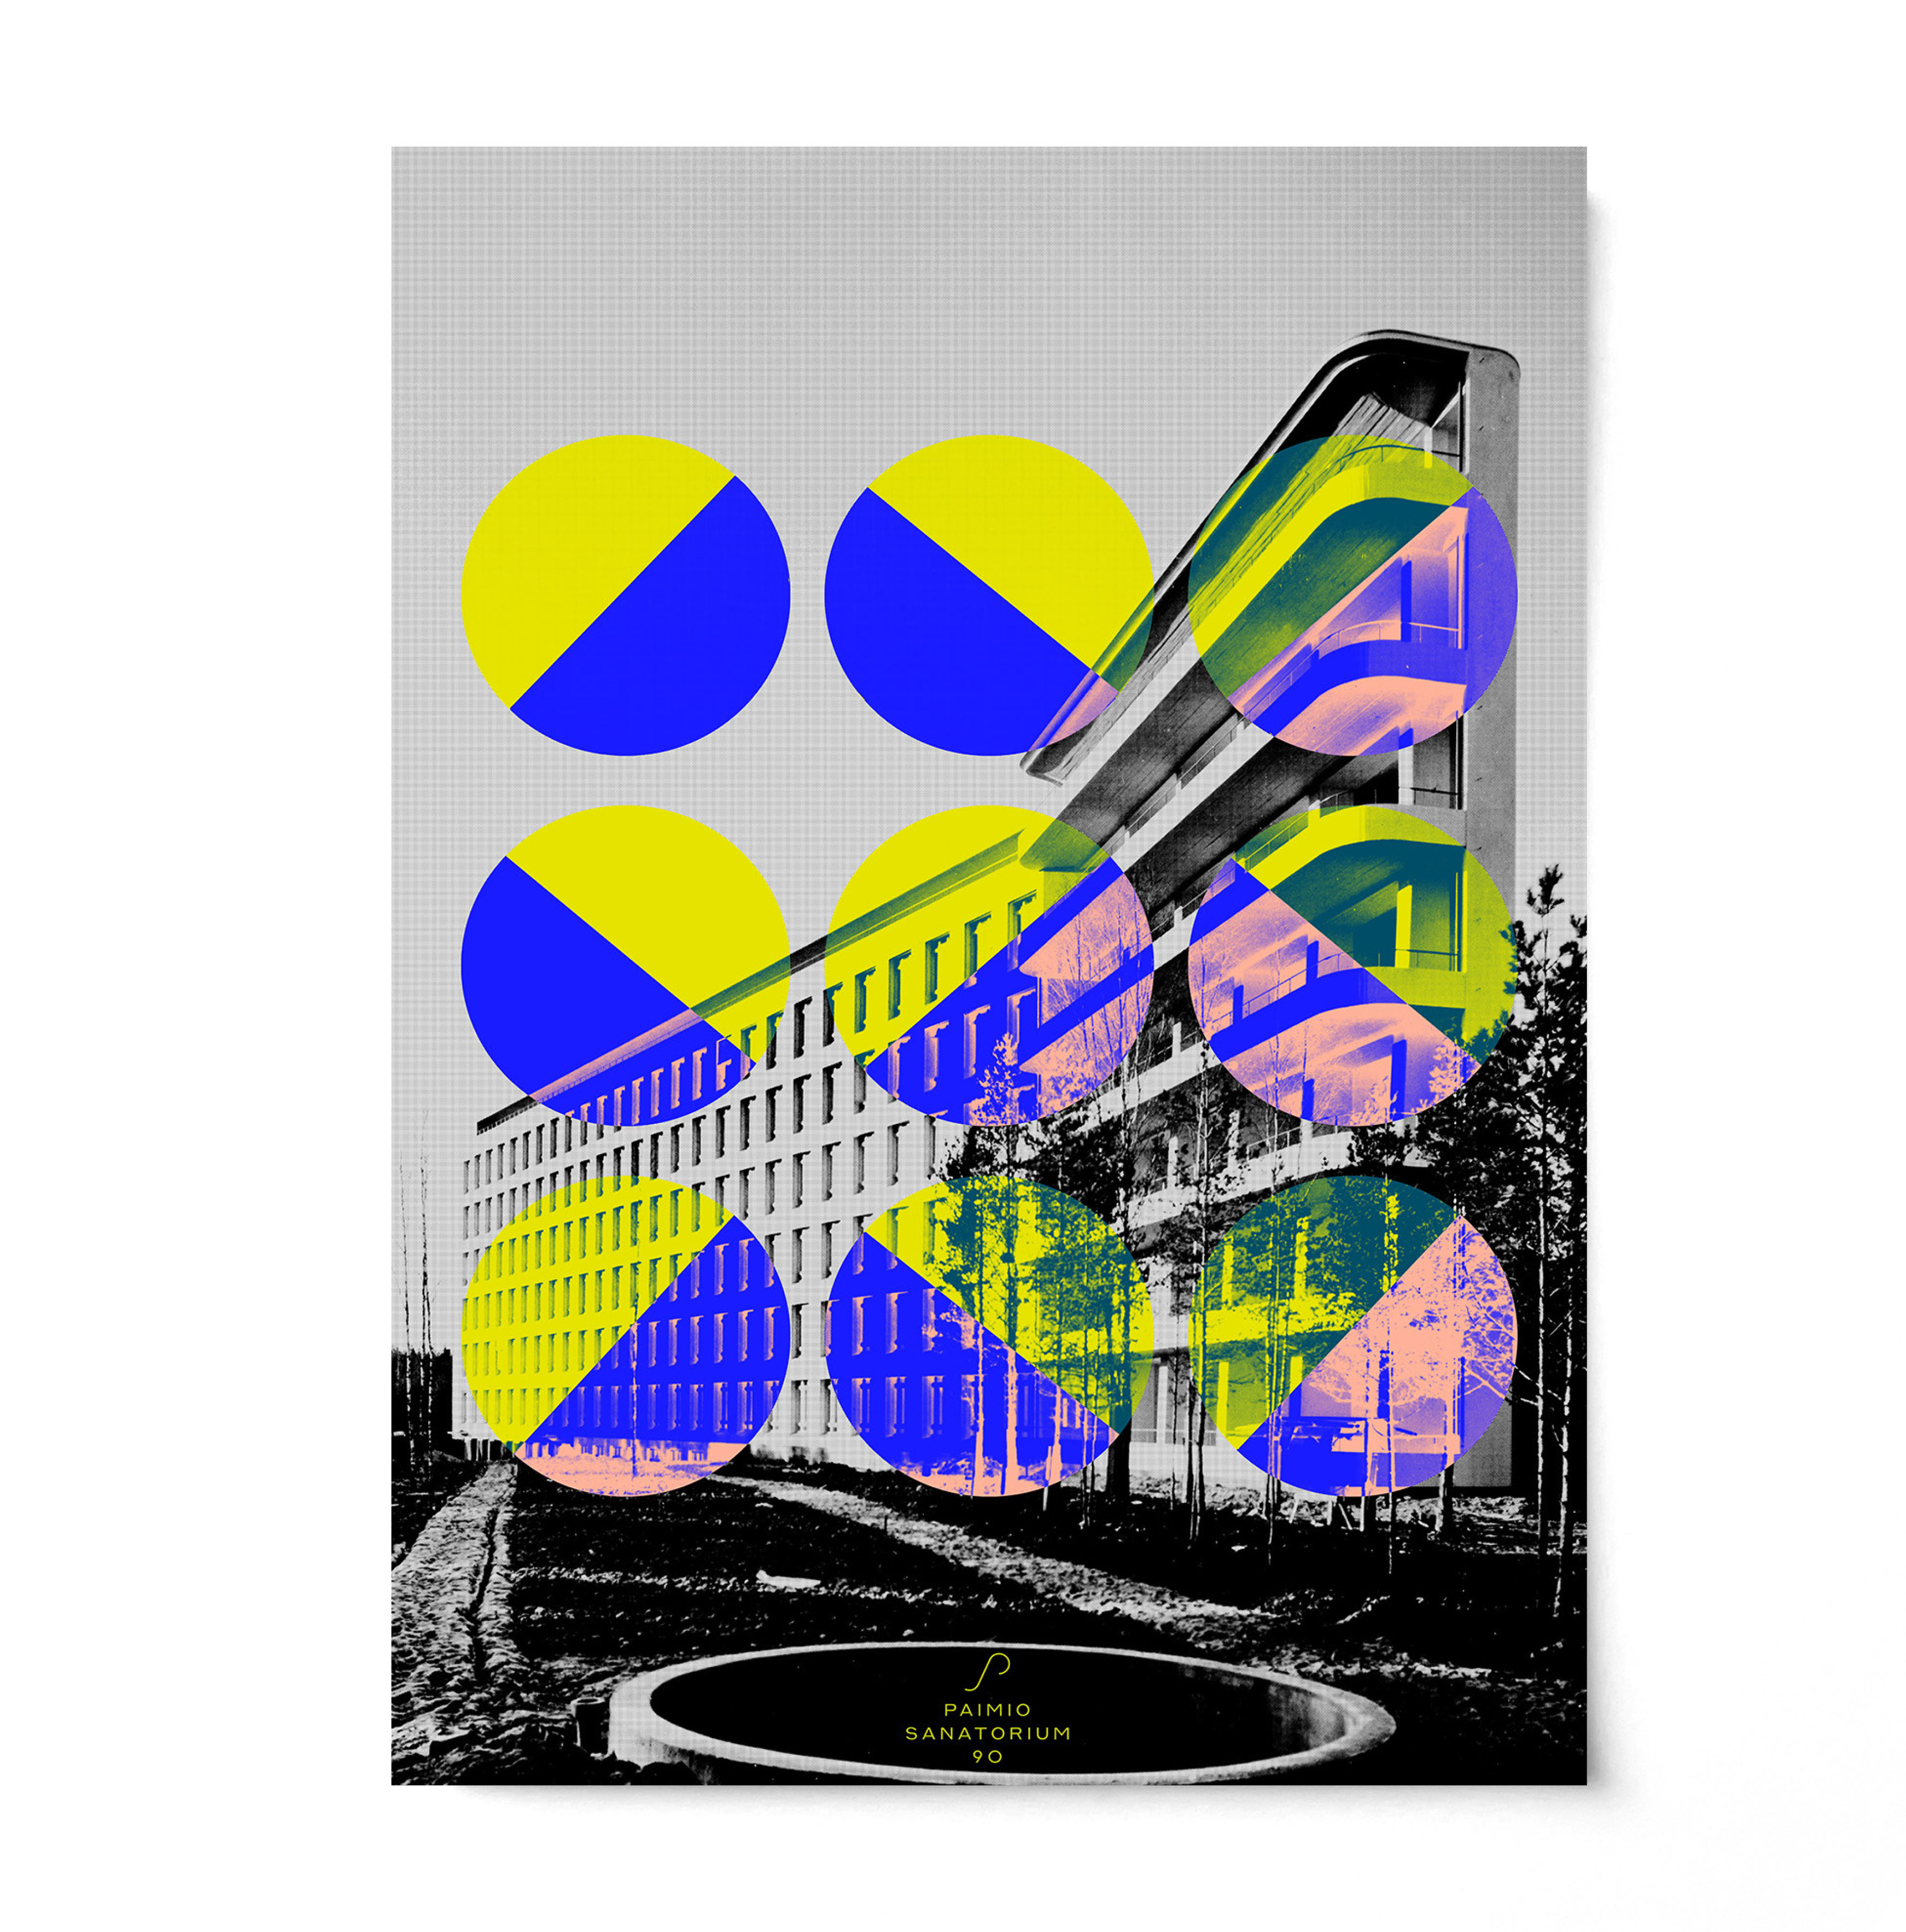 Screen-print poster design of the Paimio Sanatorium. Black and white image with colourful circle overlays.